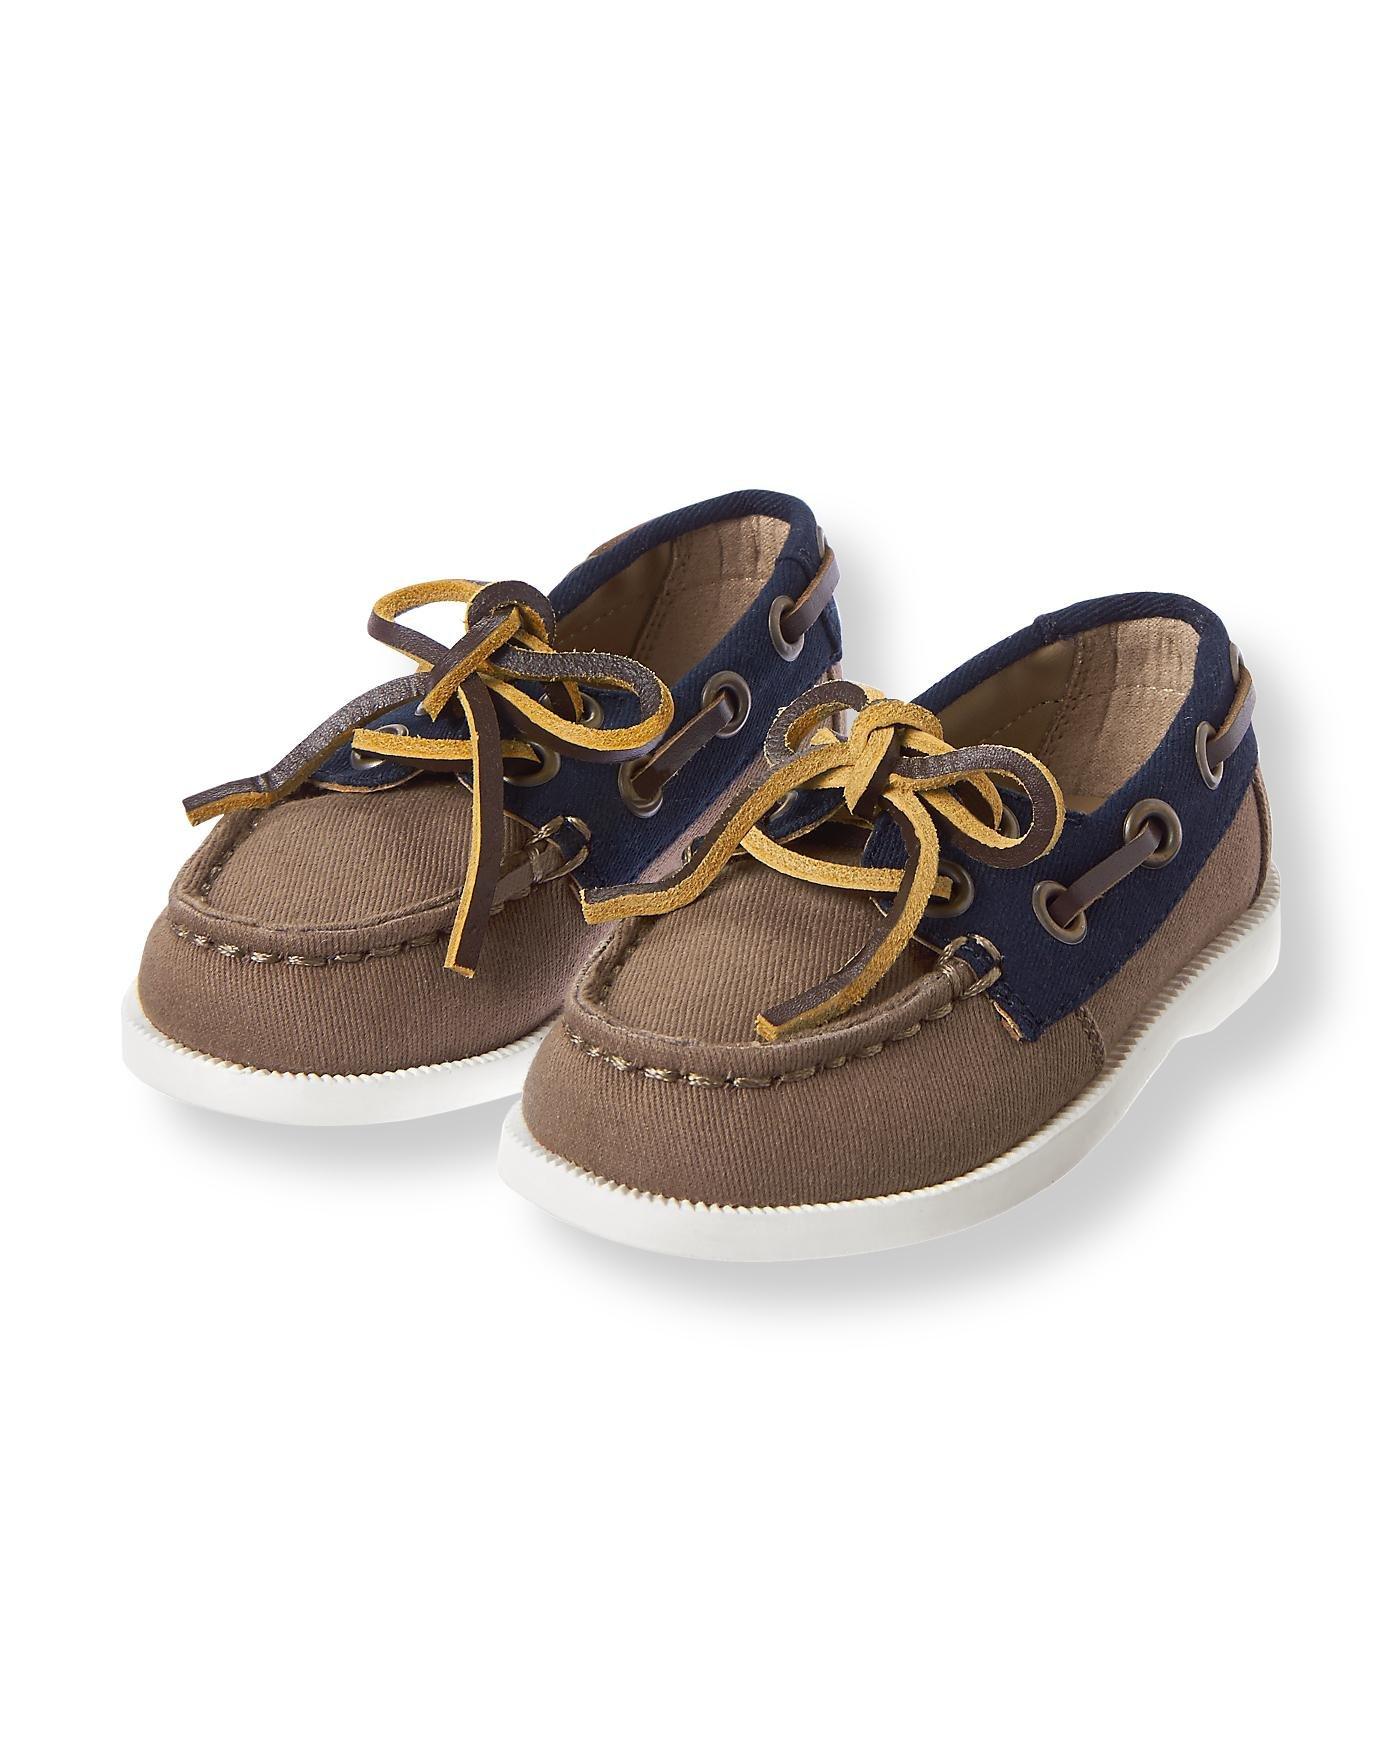 Sale Deck Brown Colorblock Boat Shoe by Janie and Jack